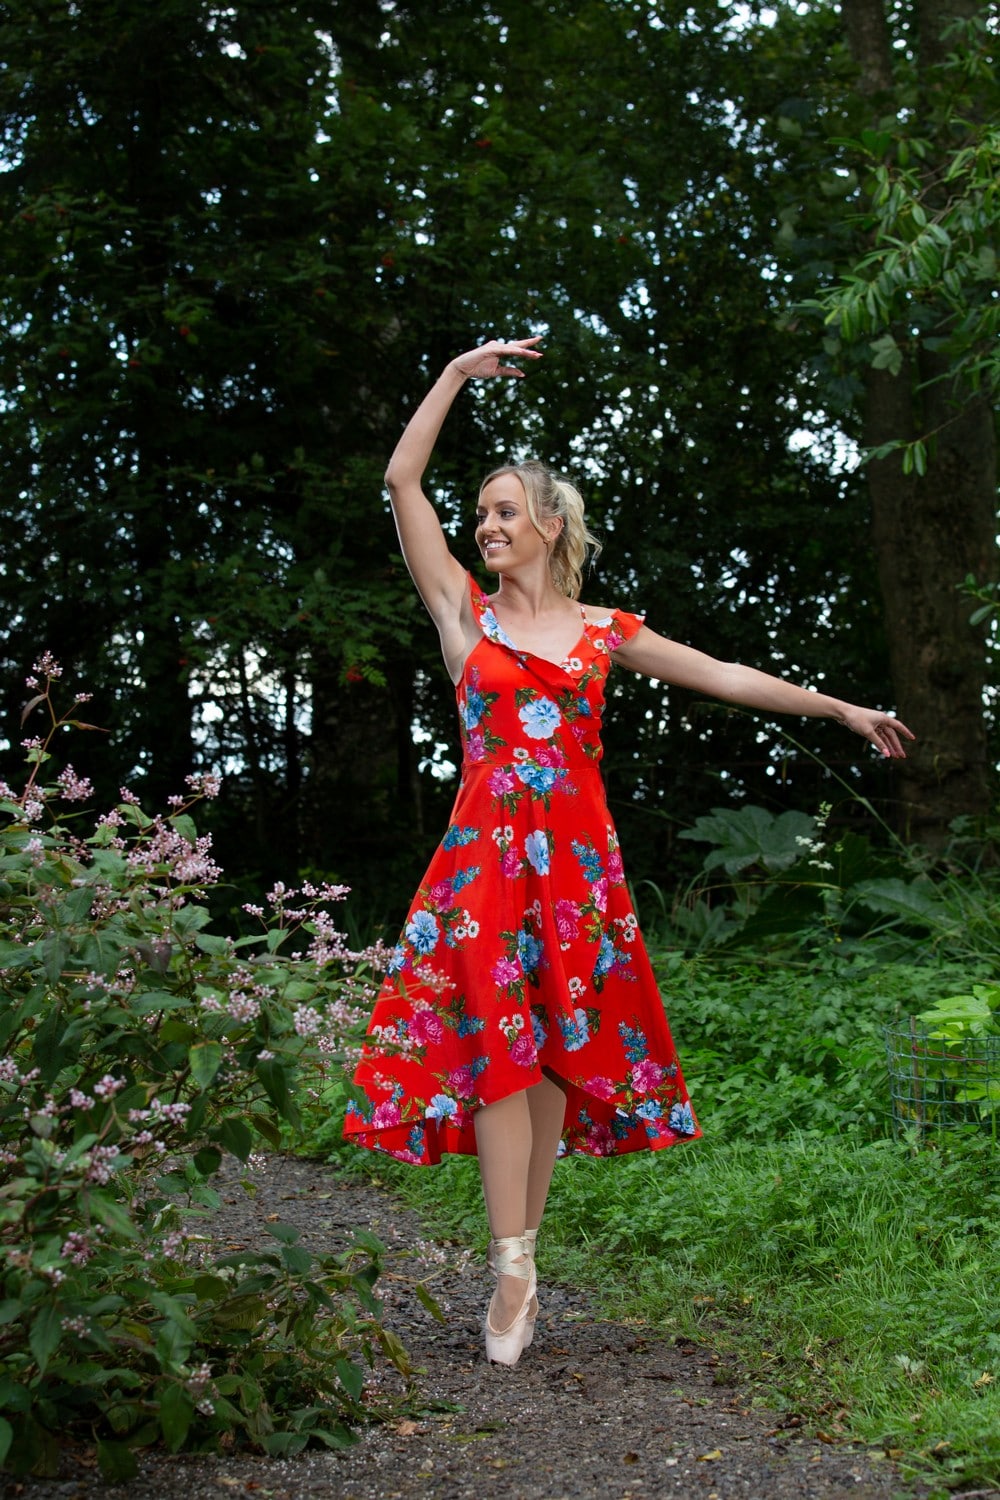 Ballet dancer on pointe in a red dress outside in the cumbrian countryside